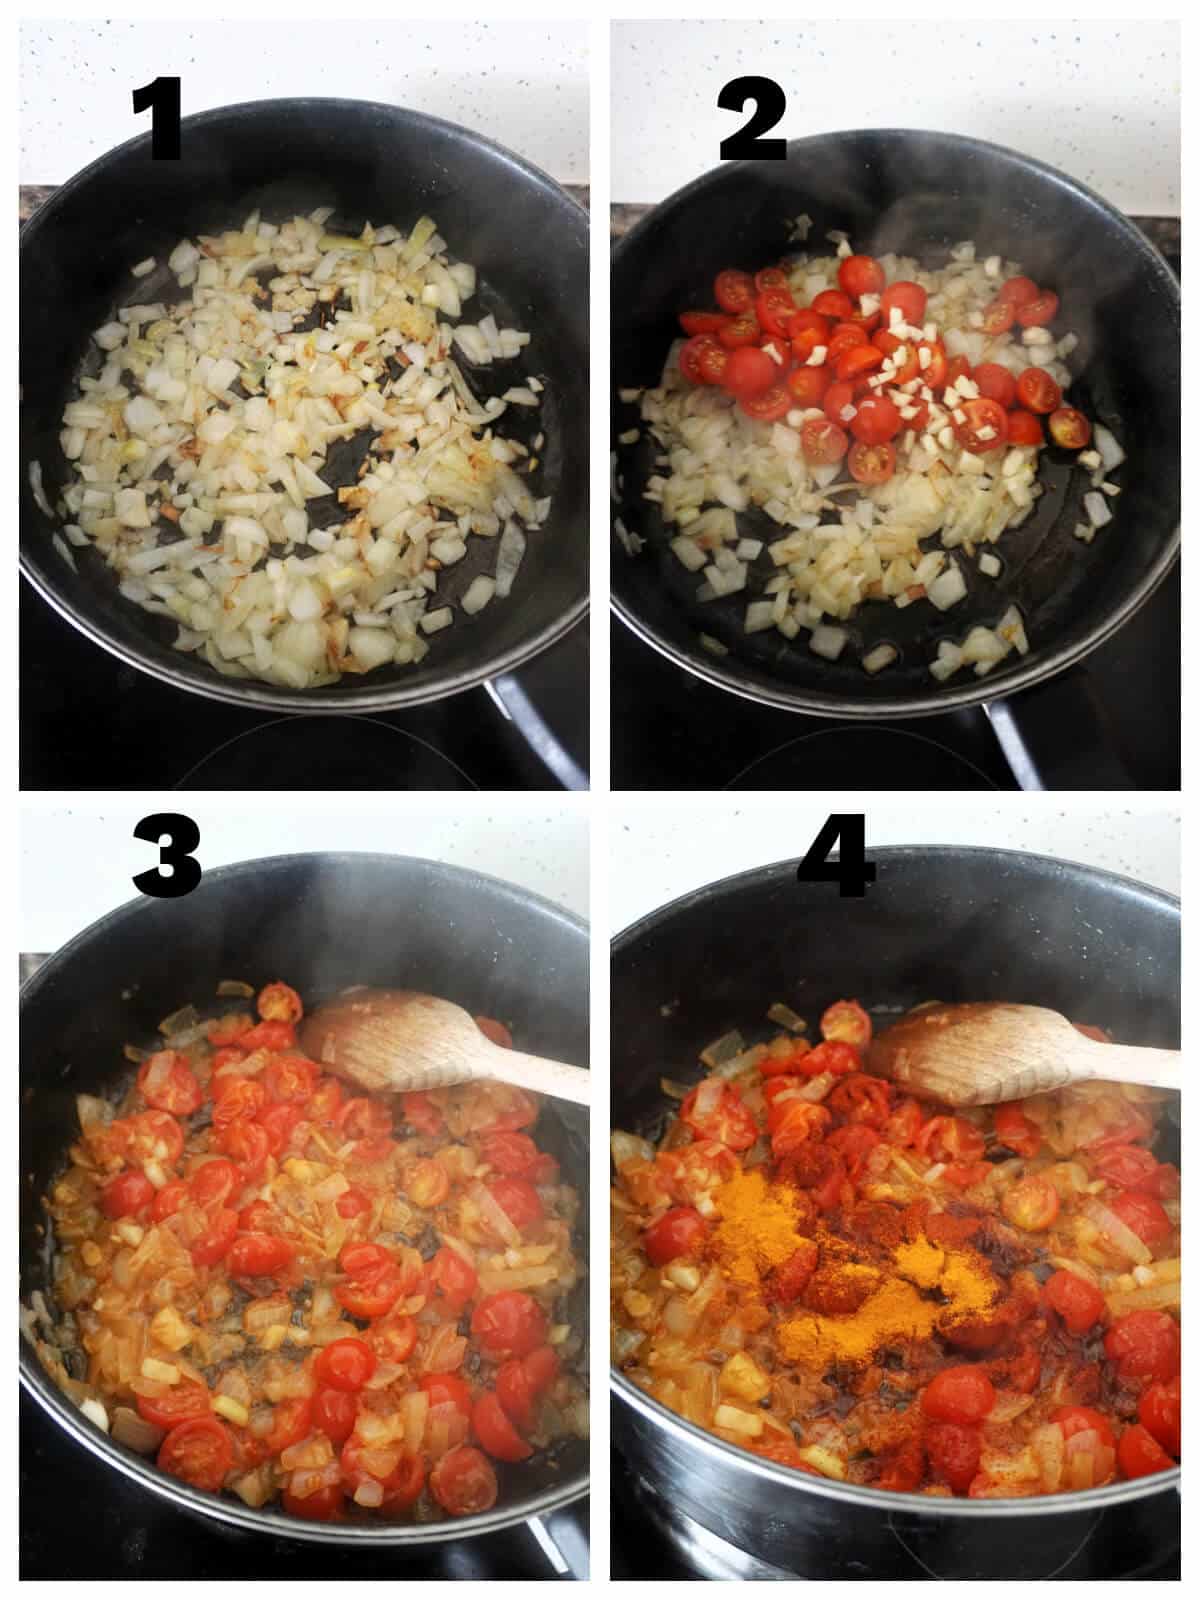 Collage of 4 photos to show how to make seafood paella.